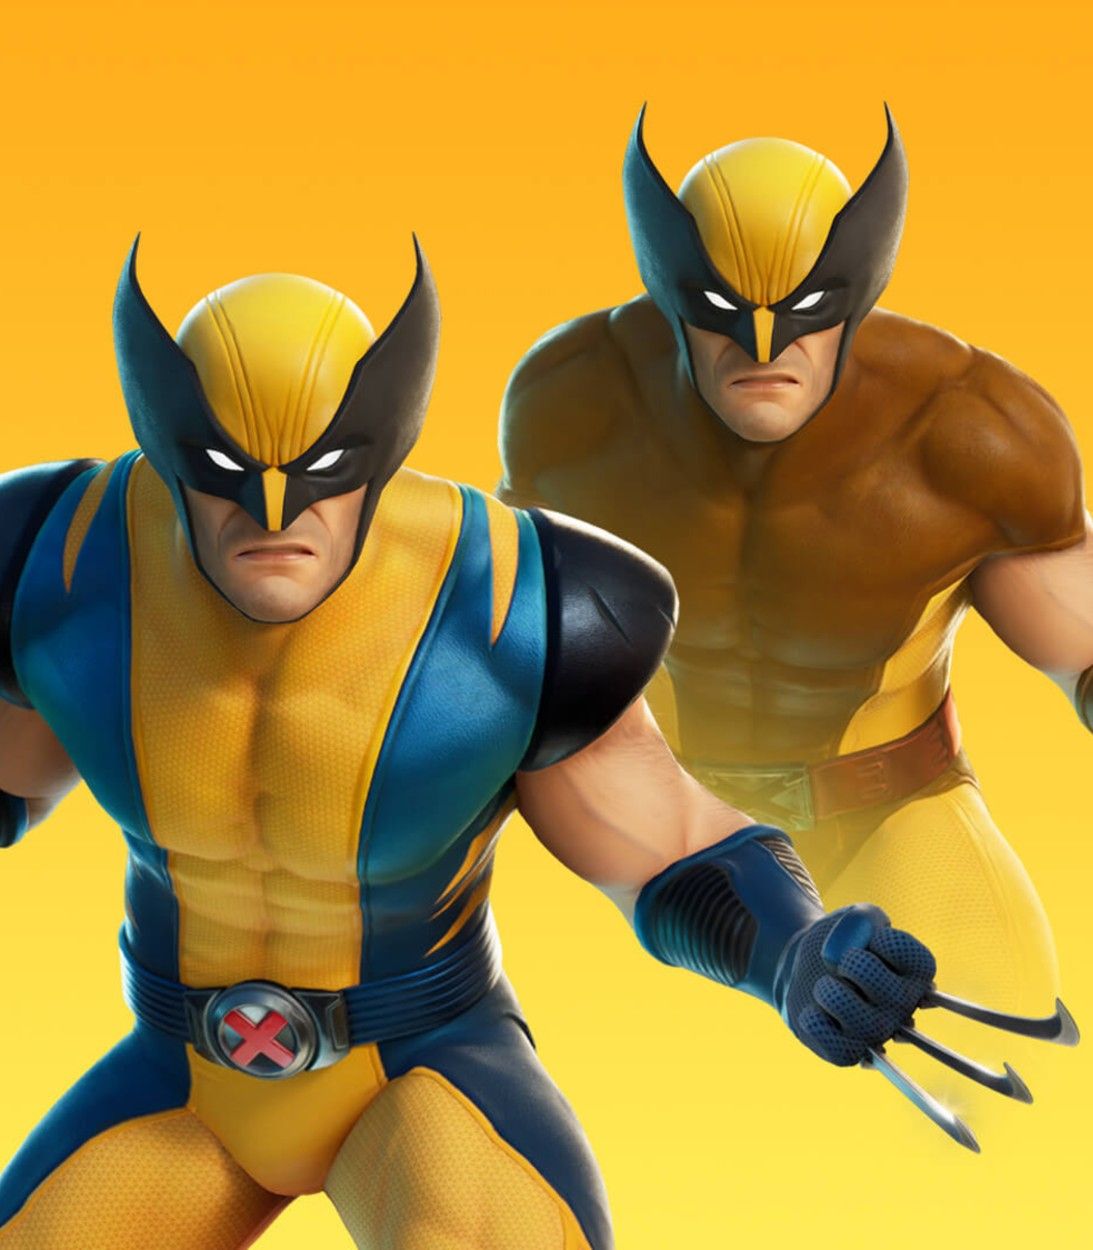 The Wolverine skin with his claws in Fortnite Season 4